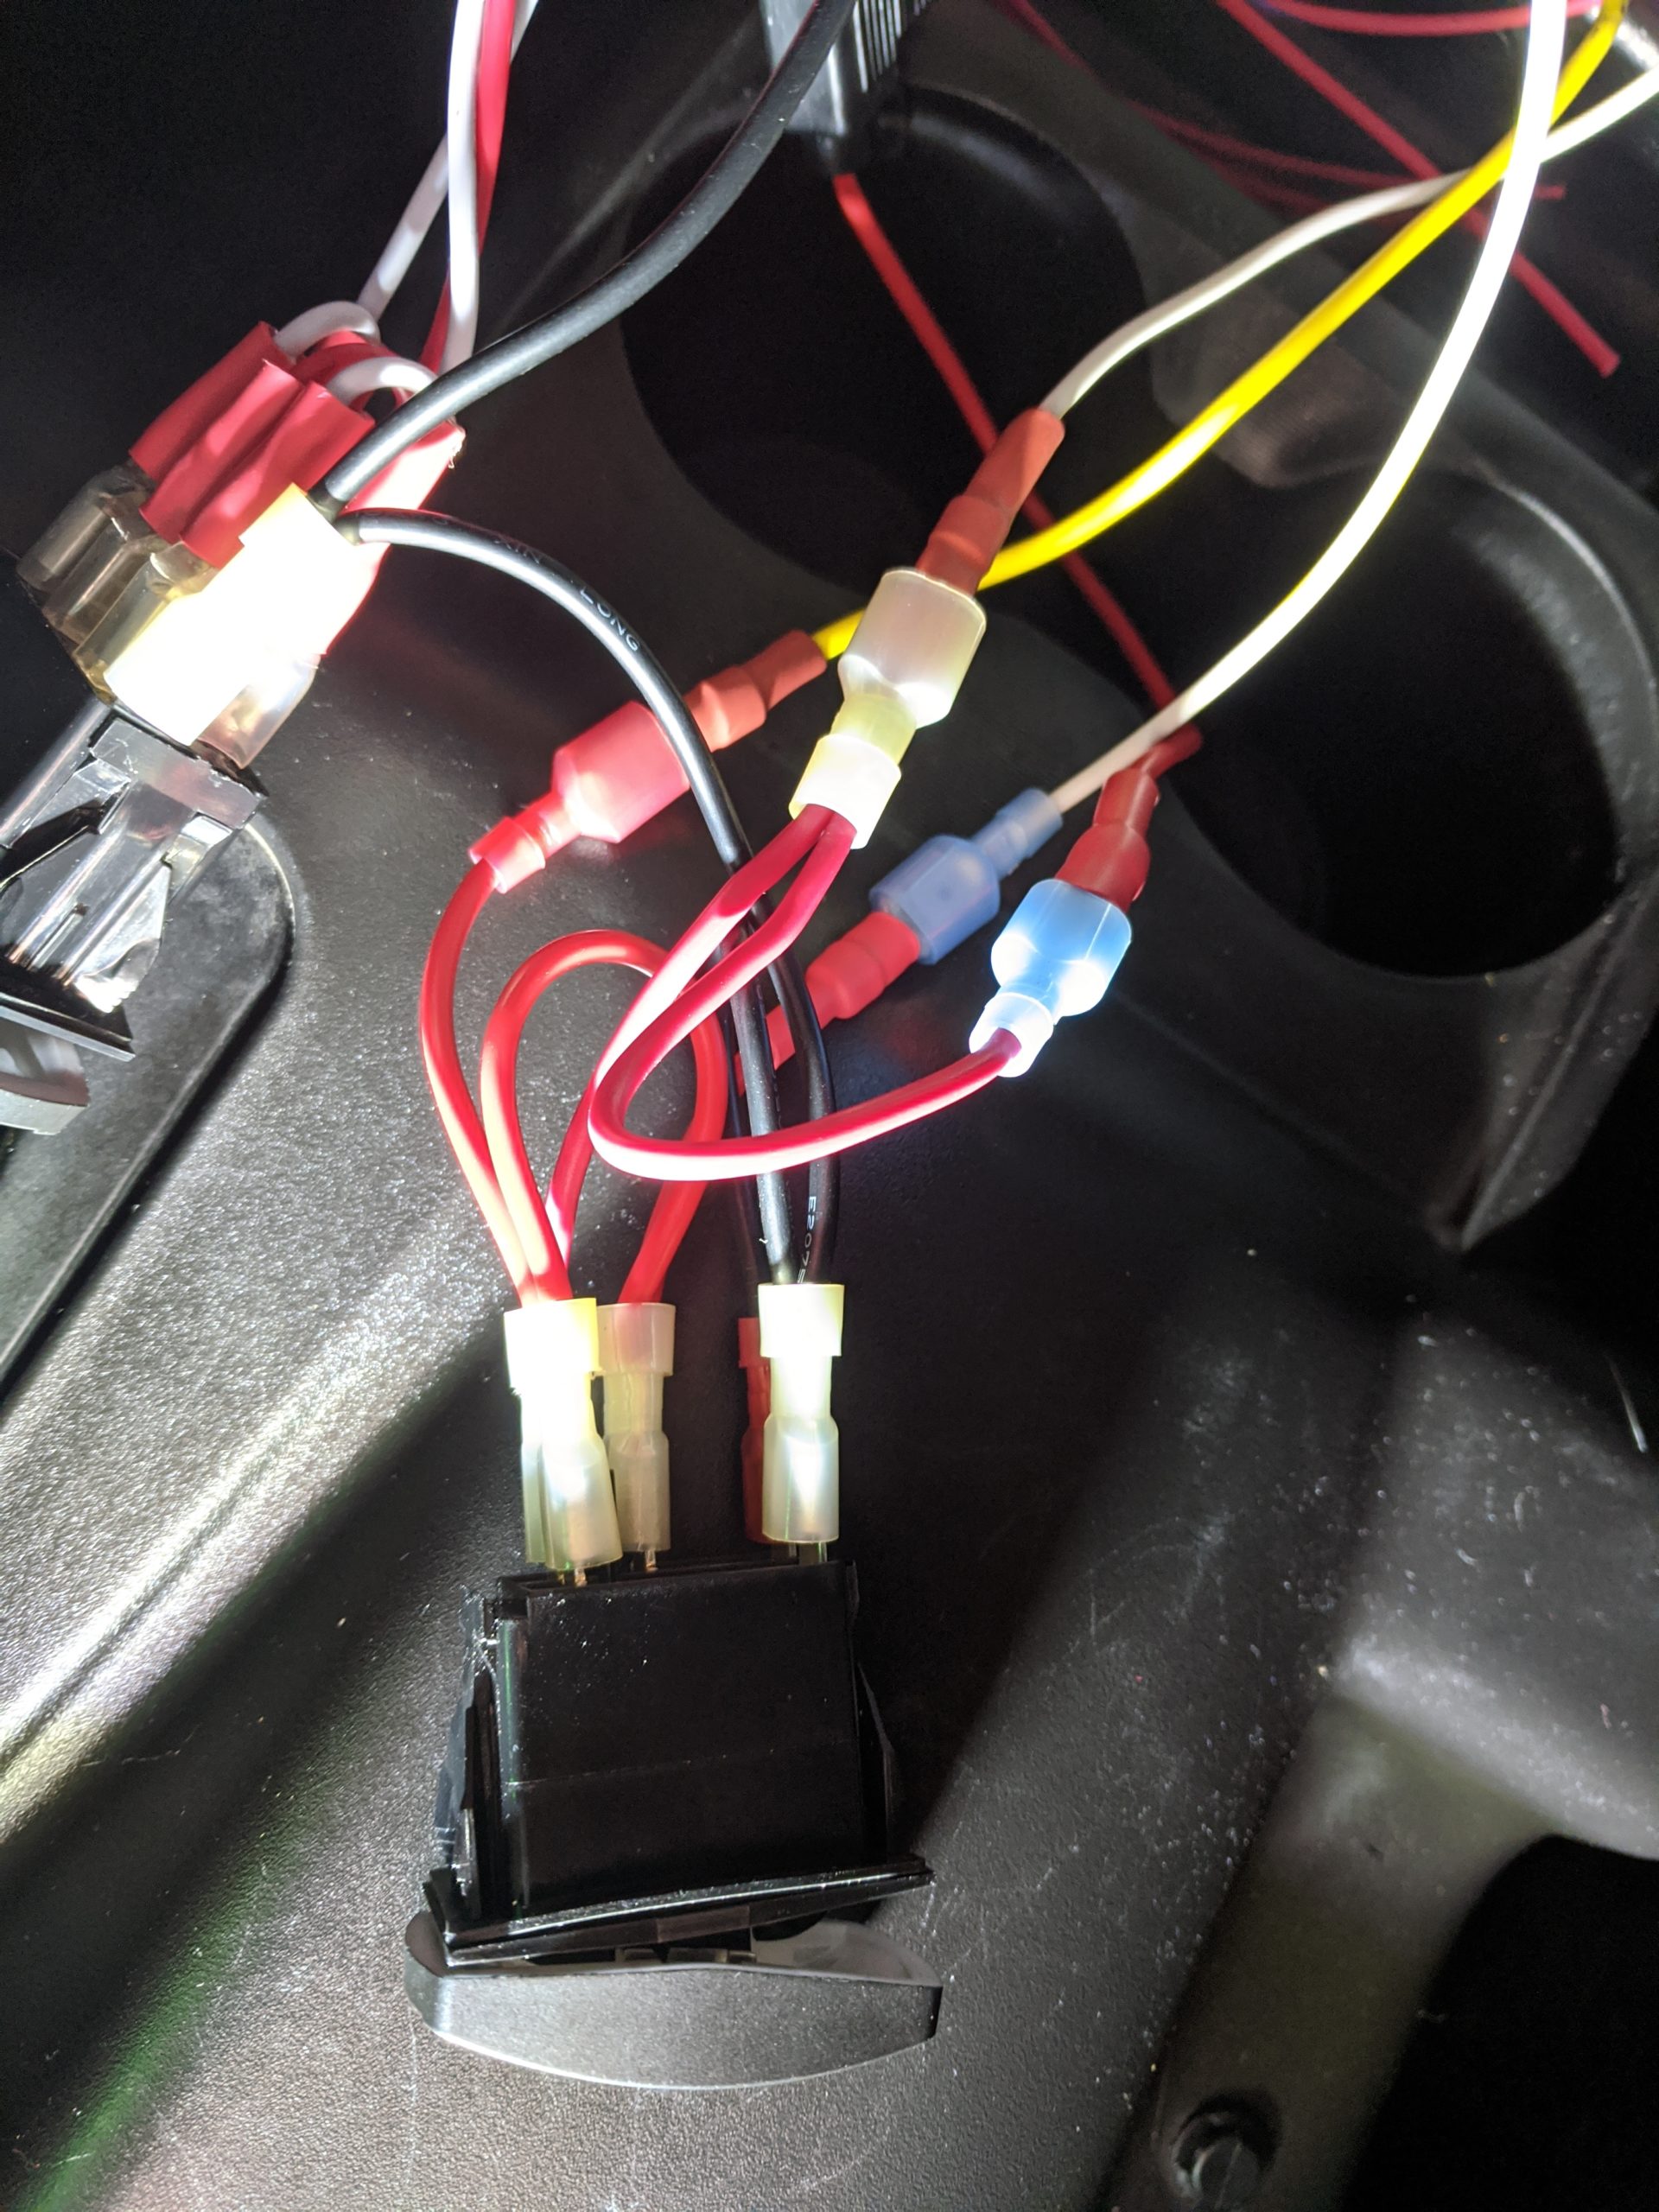 Some creative wiring solutions for the rear view camera